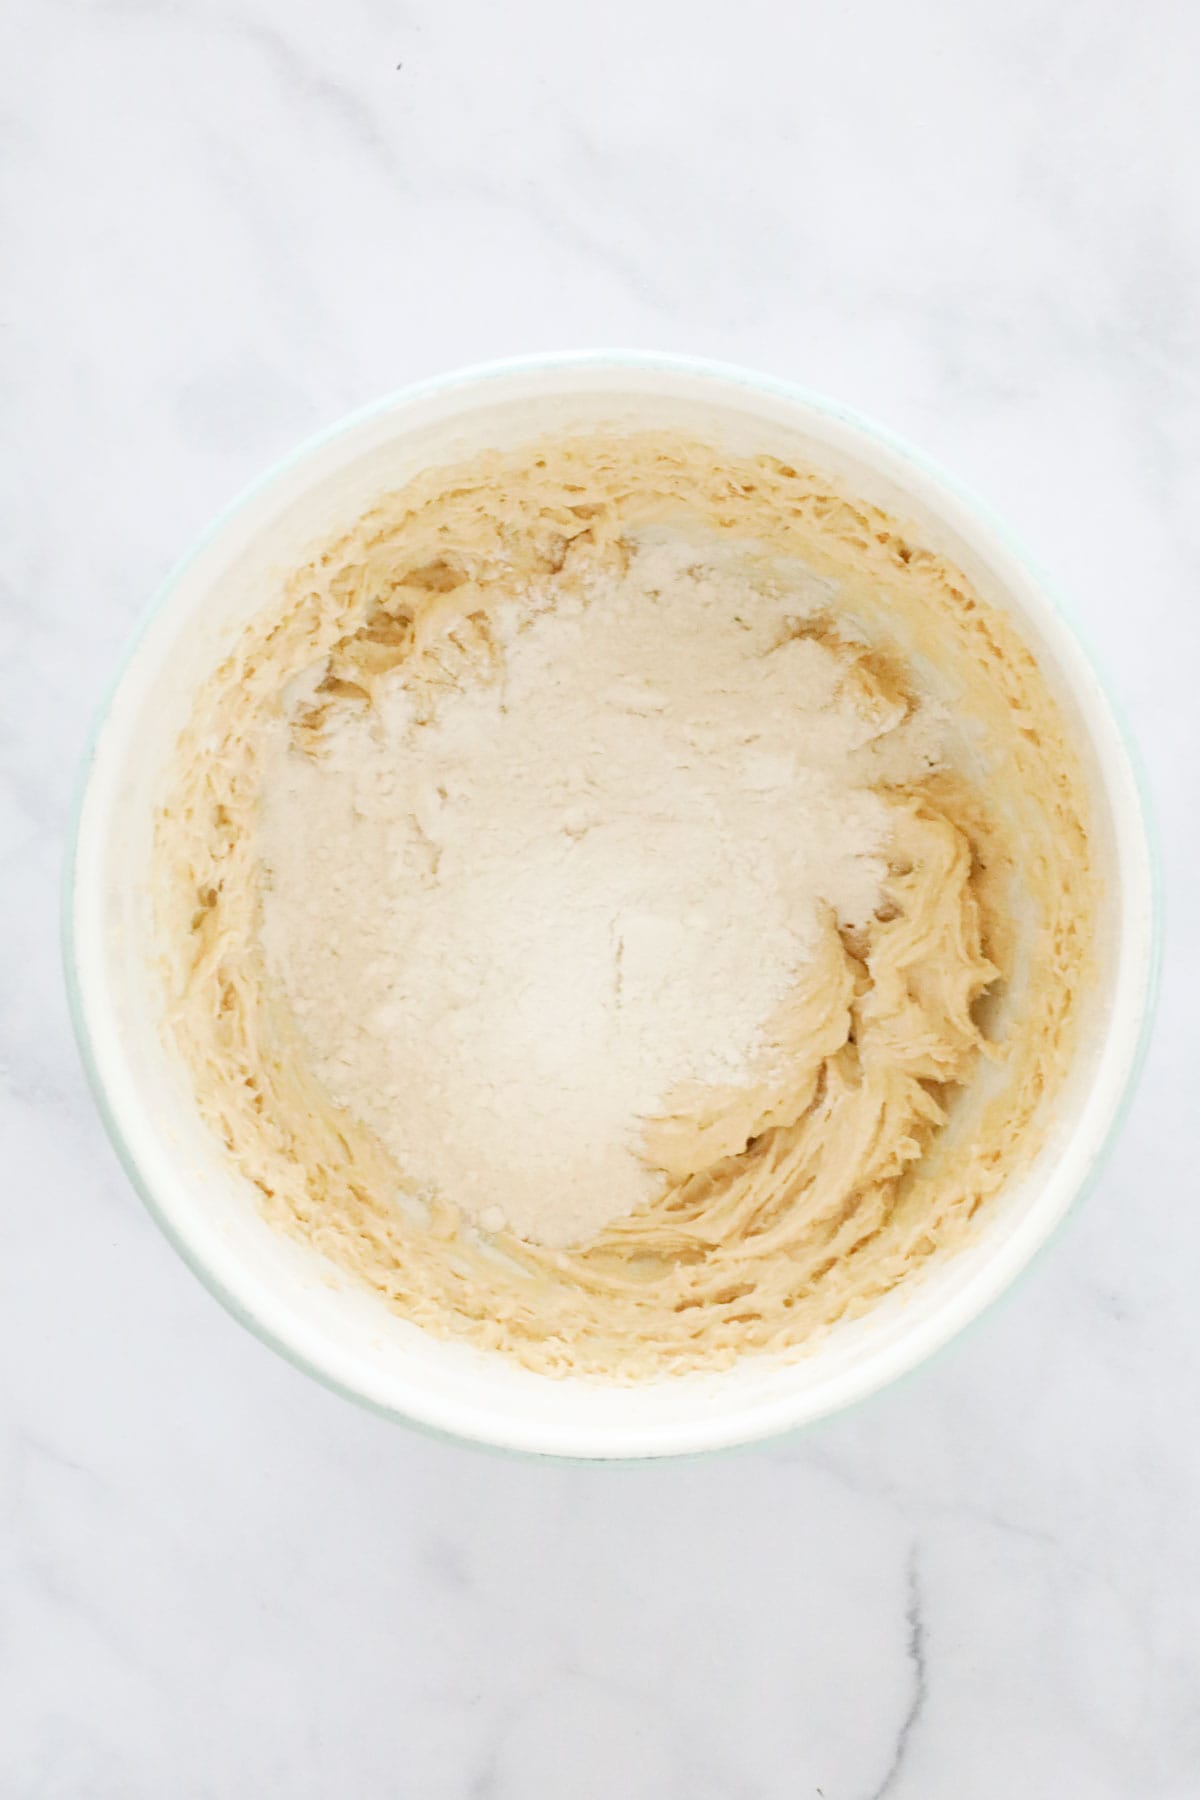 Sifted flour and baking powder over creamed mix in a bowl.